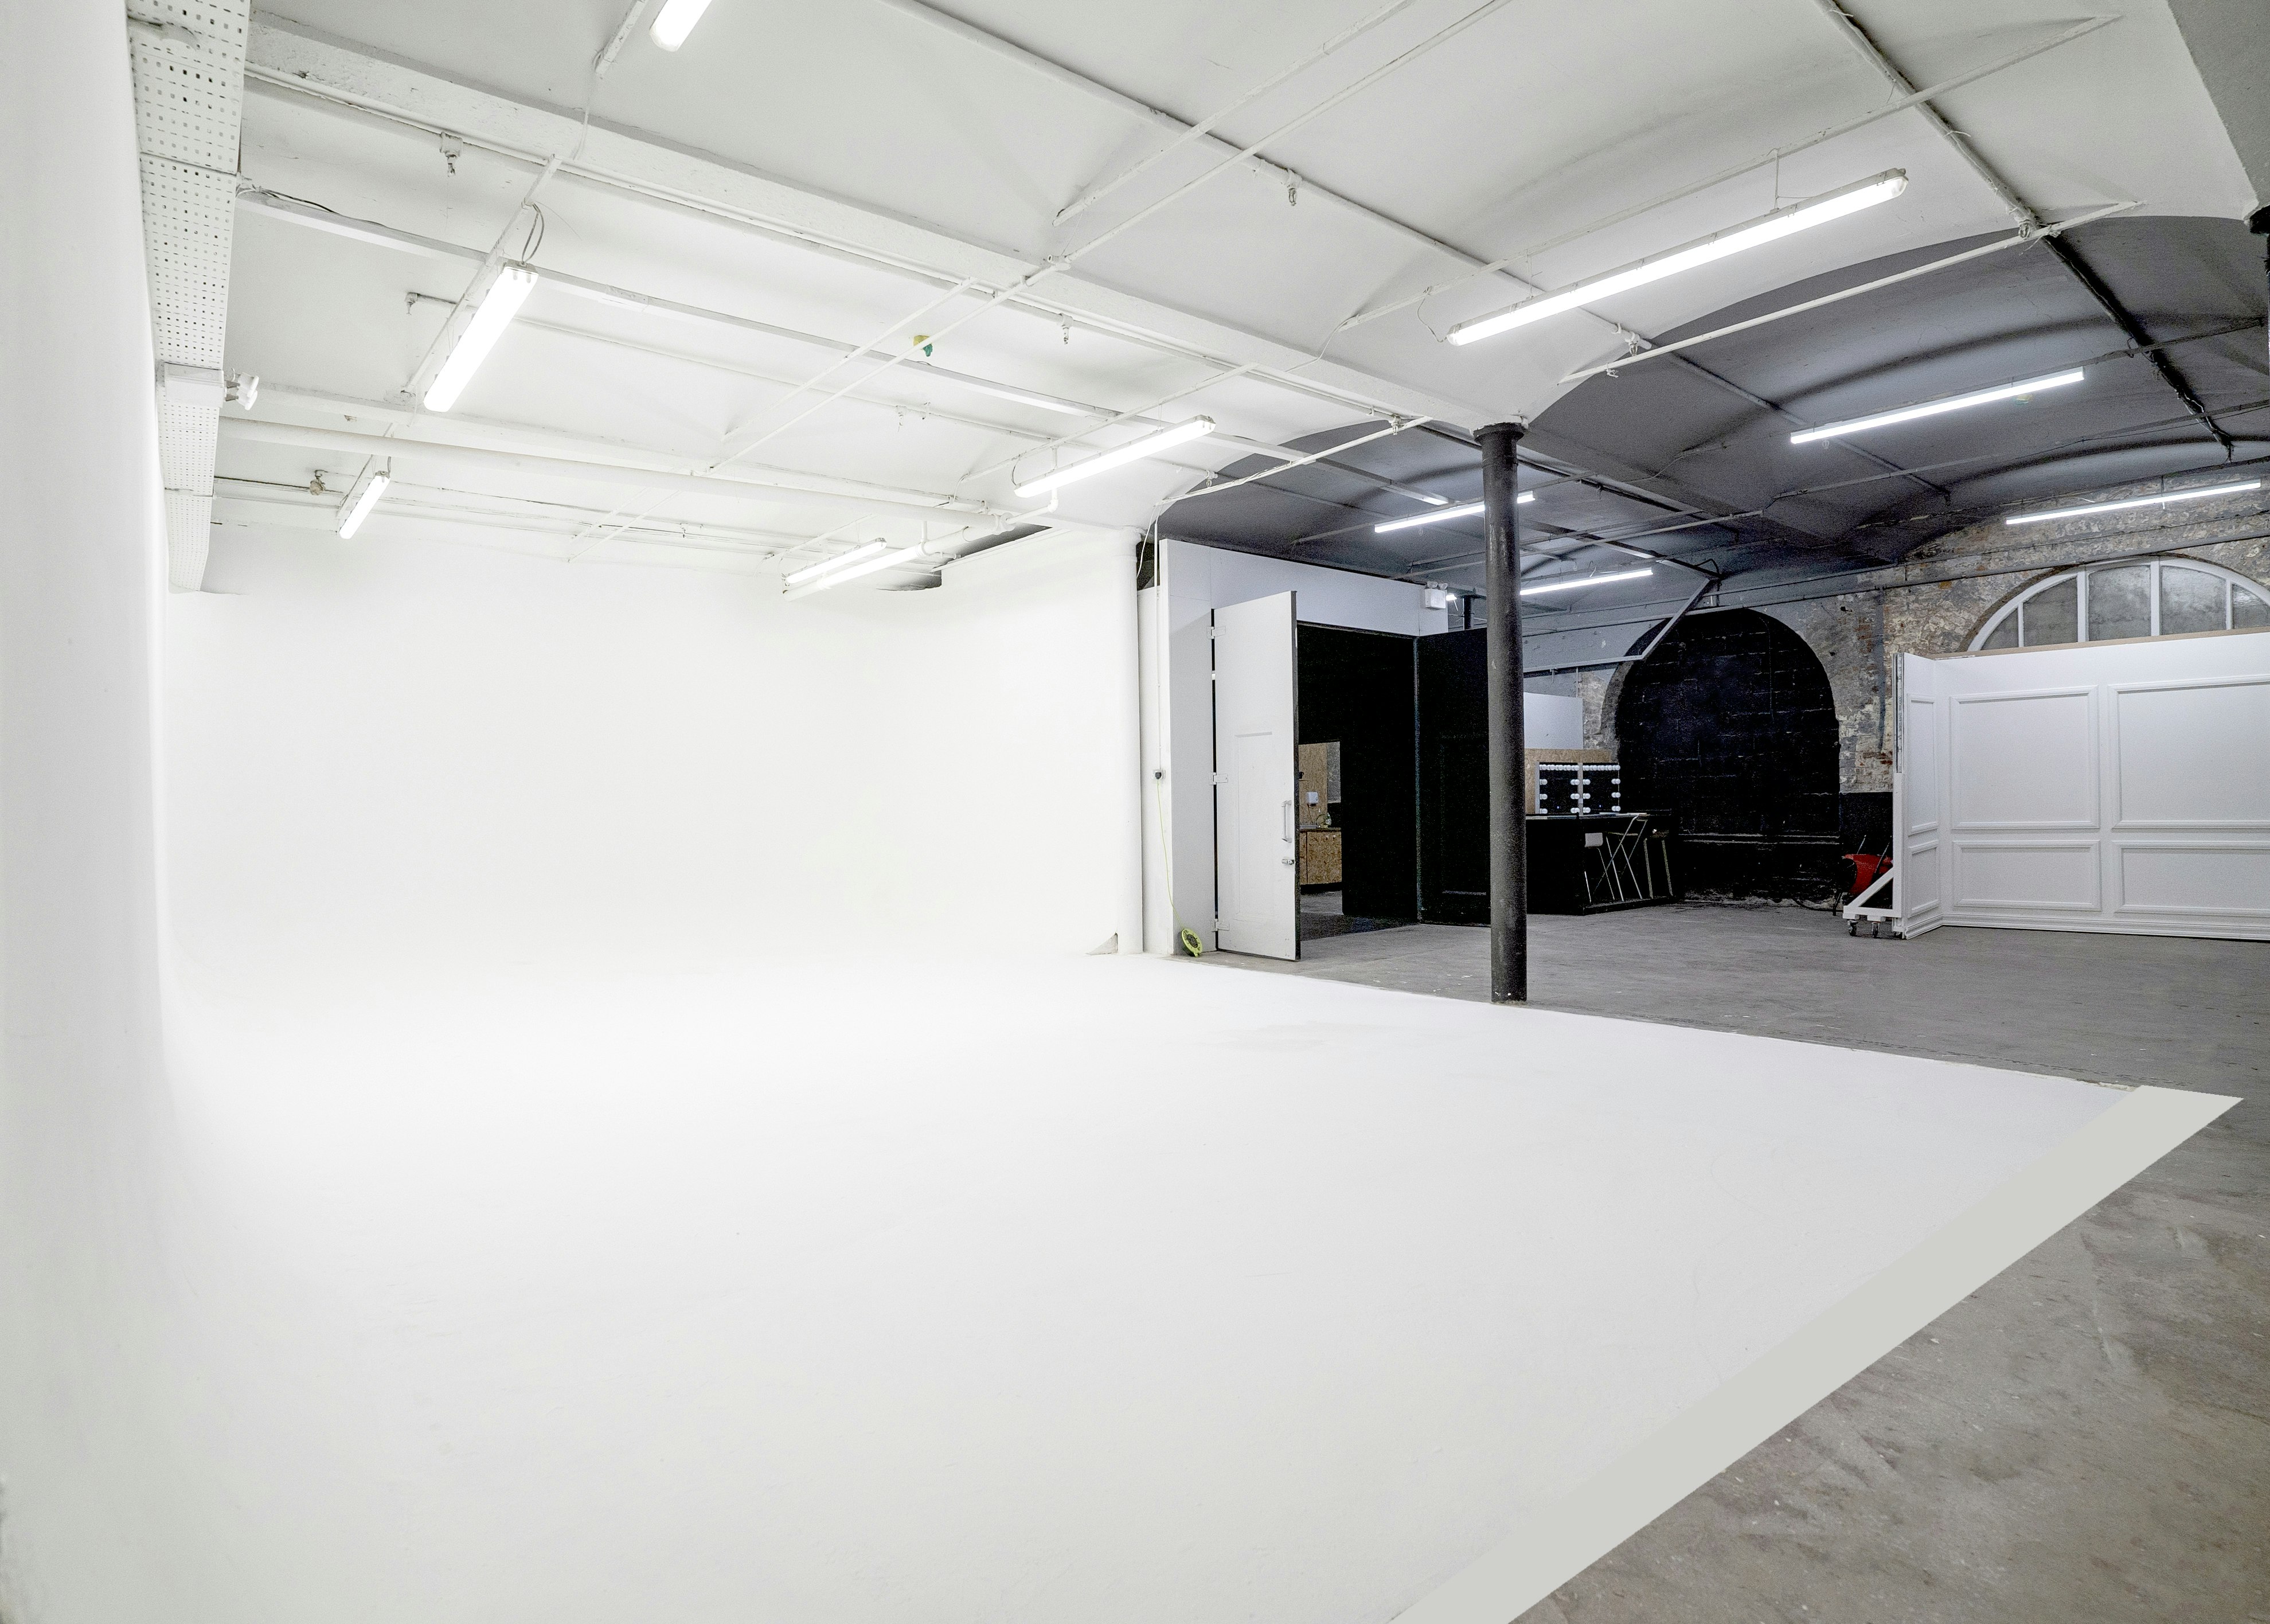 Creative Studios Venues in Manchester - Submerged Spaces